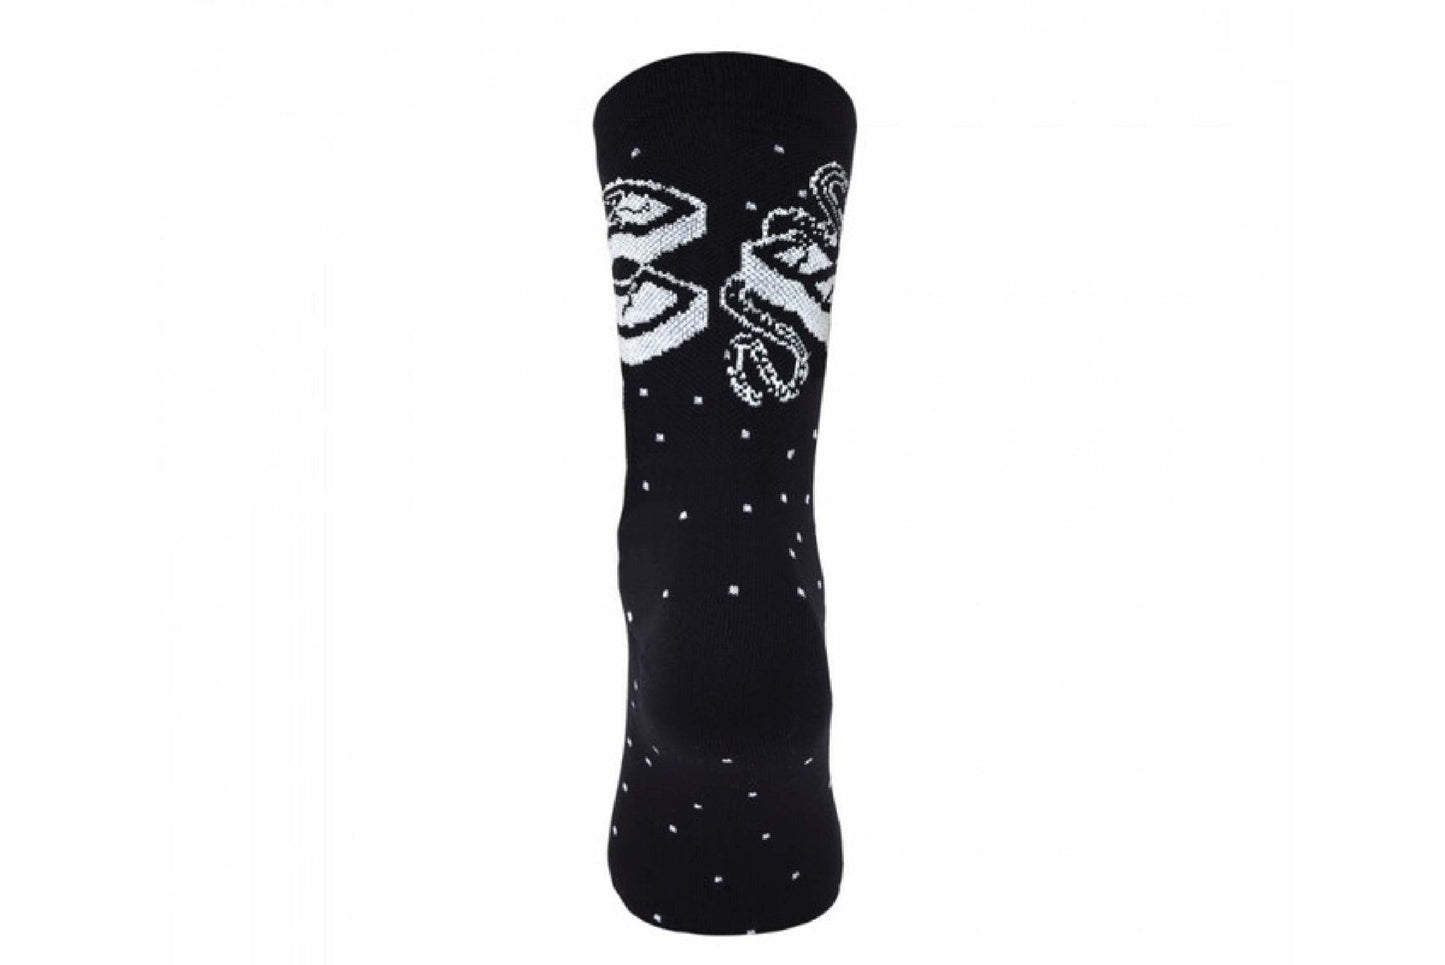 FISHTAIL CYCLERY - CINELLI Mike Giant Black Socks - FISHTAIL CYCLERY